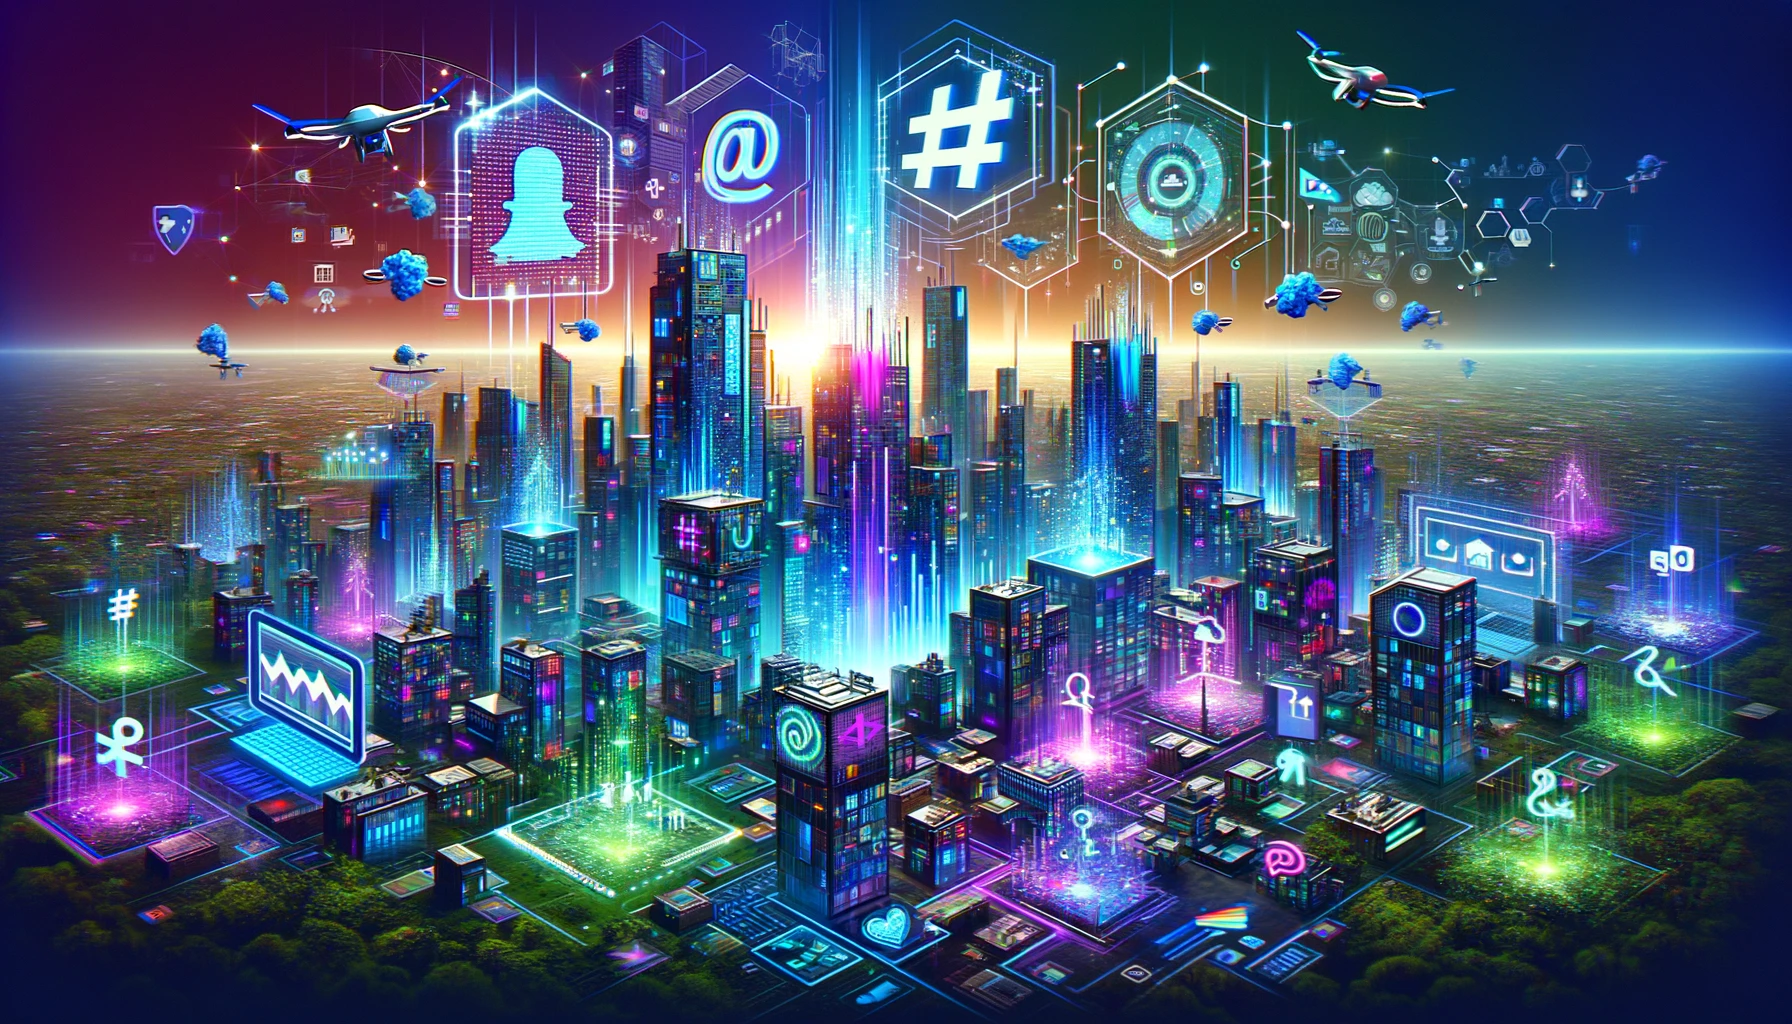 Image encapsulating 'Online Marketing Trends', displaying a futuristic digital cityscape with buildings comprised of digital elements like pixelated structures, hashtag symbols, and social media icons, symbolizing the evolving landscape of online marketing.